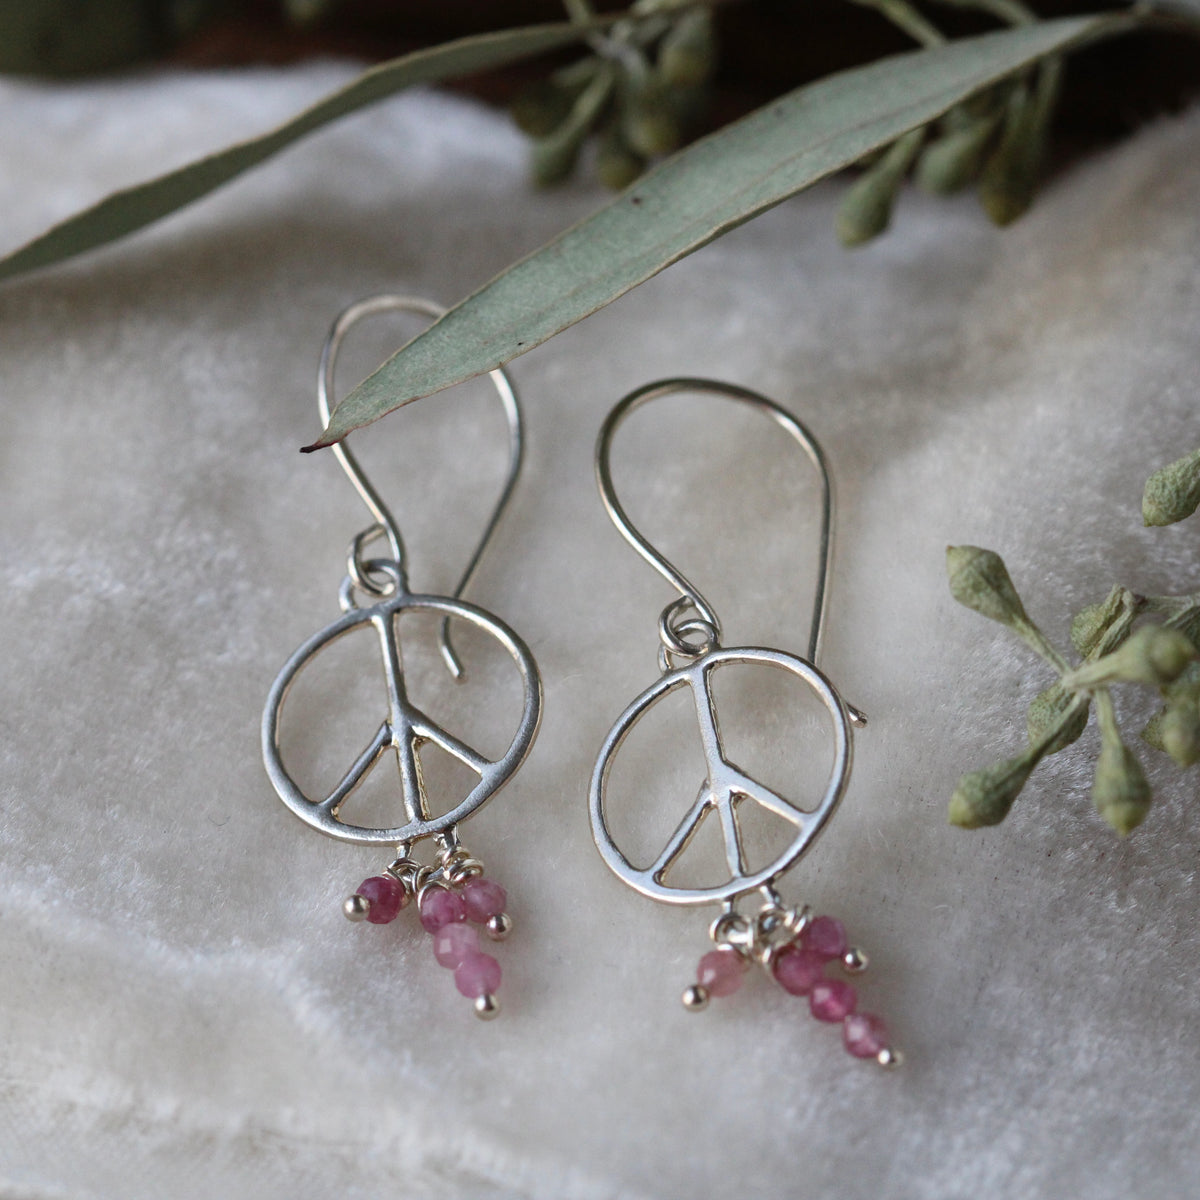 Clearance Sale Peace symbol dangle earrings sterling and pink tourmaline